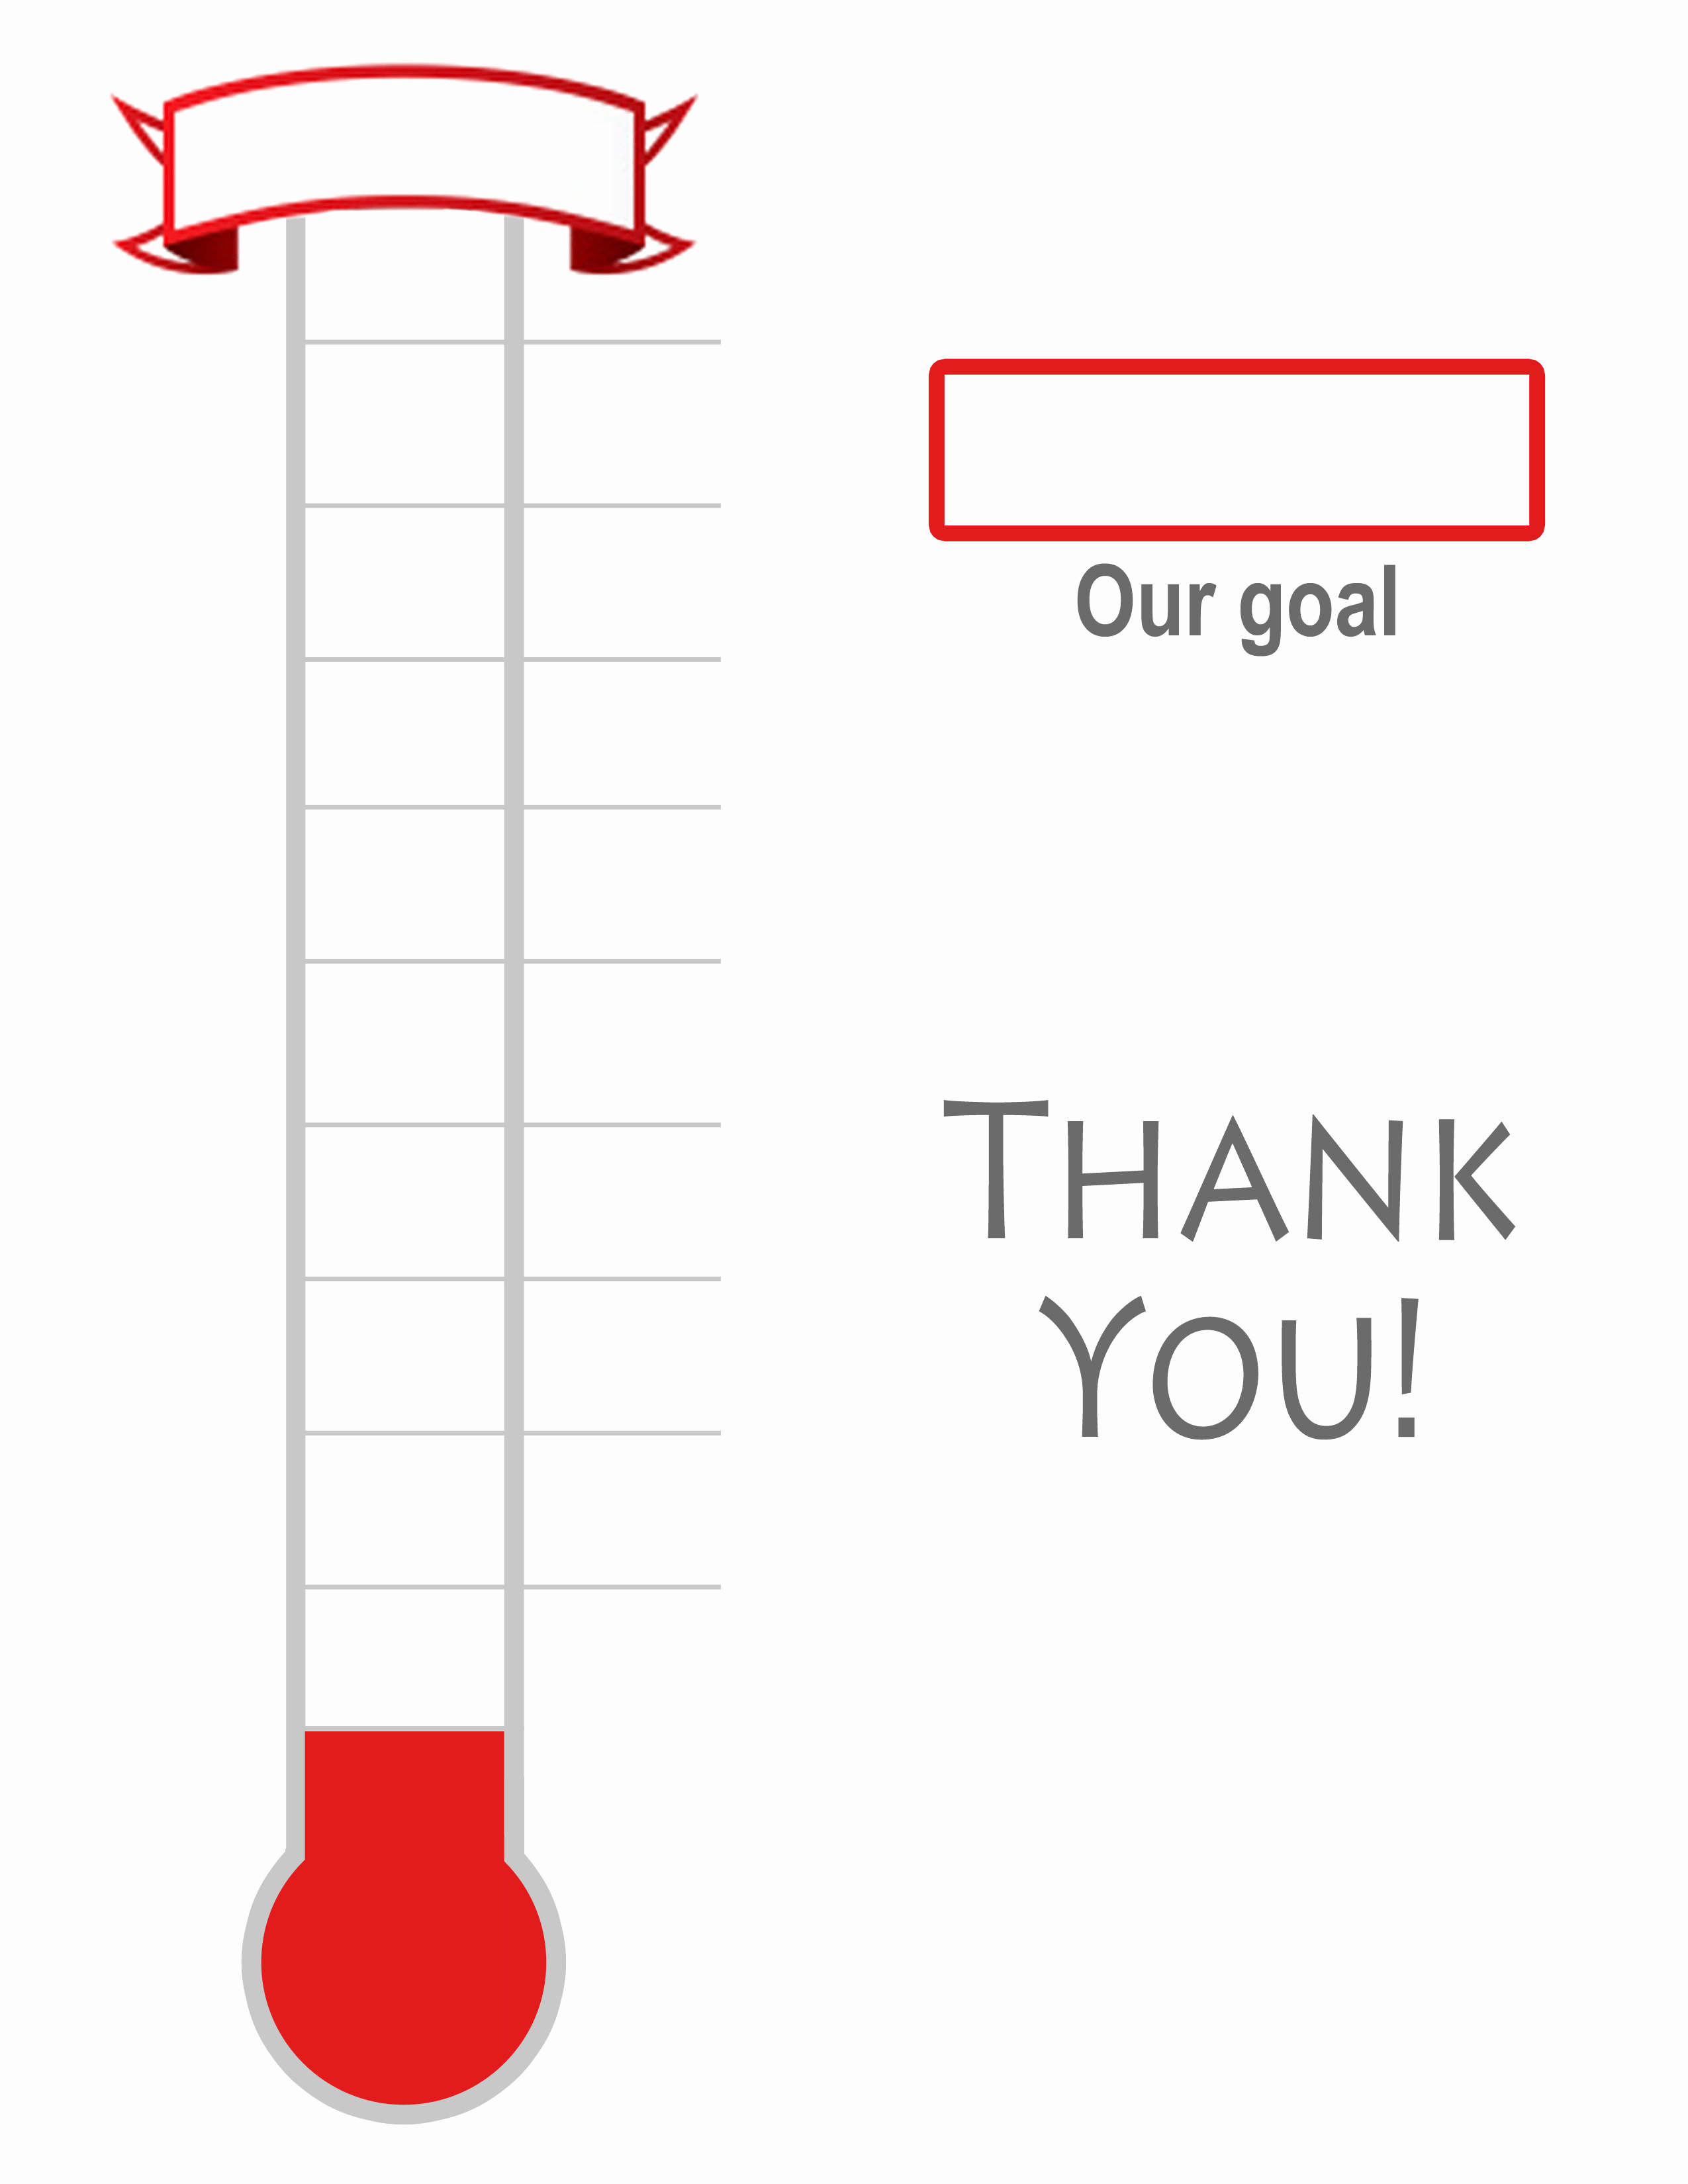 Blank thermometer Image New thermometer Template Fundraising Goal Blank &amp; Printable